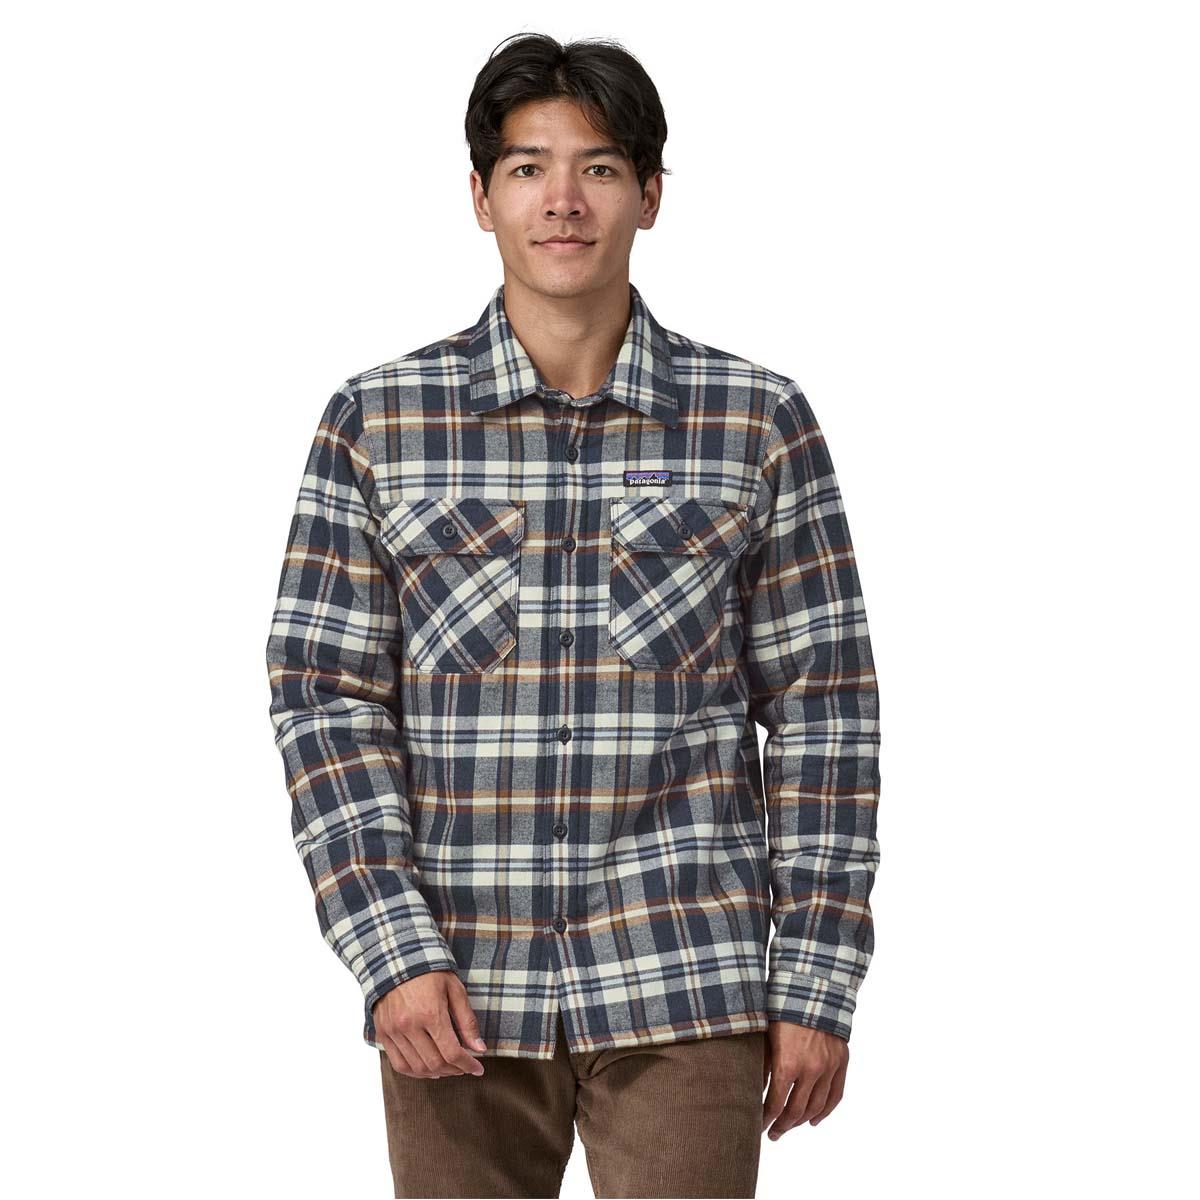 Patagonia Insulated Organic Cotton Midweight Fjord Flannel Shirt - Men's - Fields New Navy - L